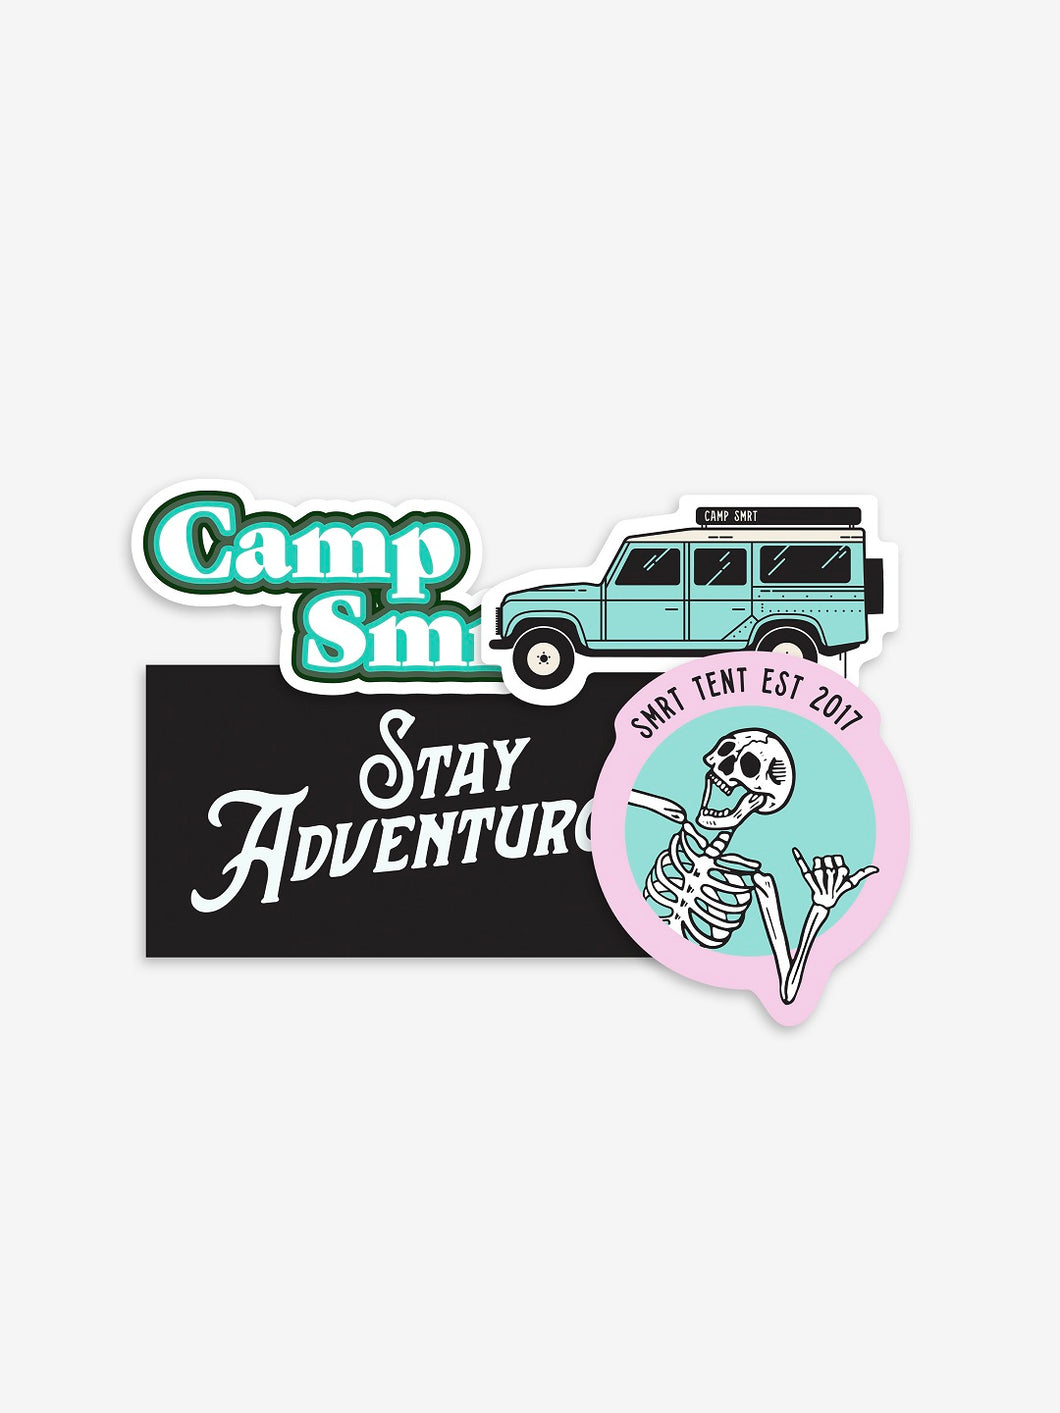 Pictured are the 4 stickers in the Cool Blue theme of our SMRT Tent Sticker Pack. Included are (1) Camp SMRT Retro Green and white sticker, (1) Camp SMRT Land Rover Defender 110 sticker in teal, (1) Classic rectangular Black and White Stay Adventurous sticker, and (1) Classy Pink & Teal Laughing Skeleton SMRT Tent EST 2017 sticker. Perfect for your roof top tent or water bottle! Available for sale by SMRT Tent in Denver, Colorado, USA.